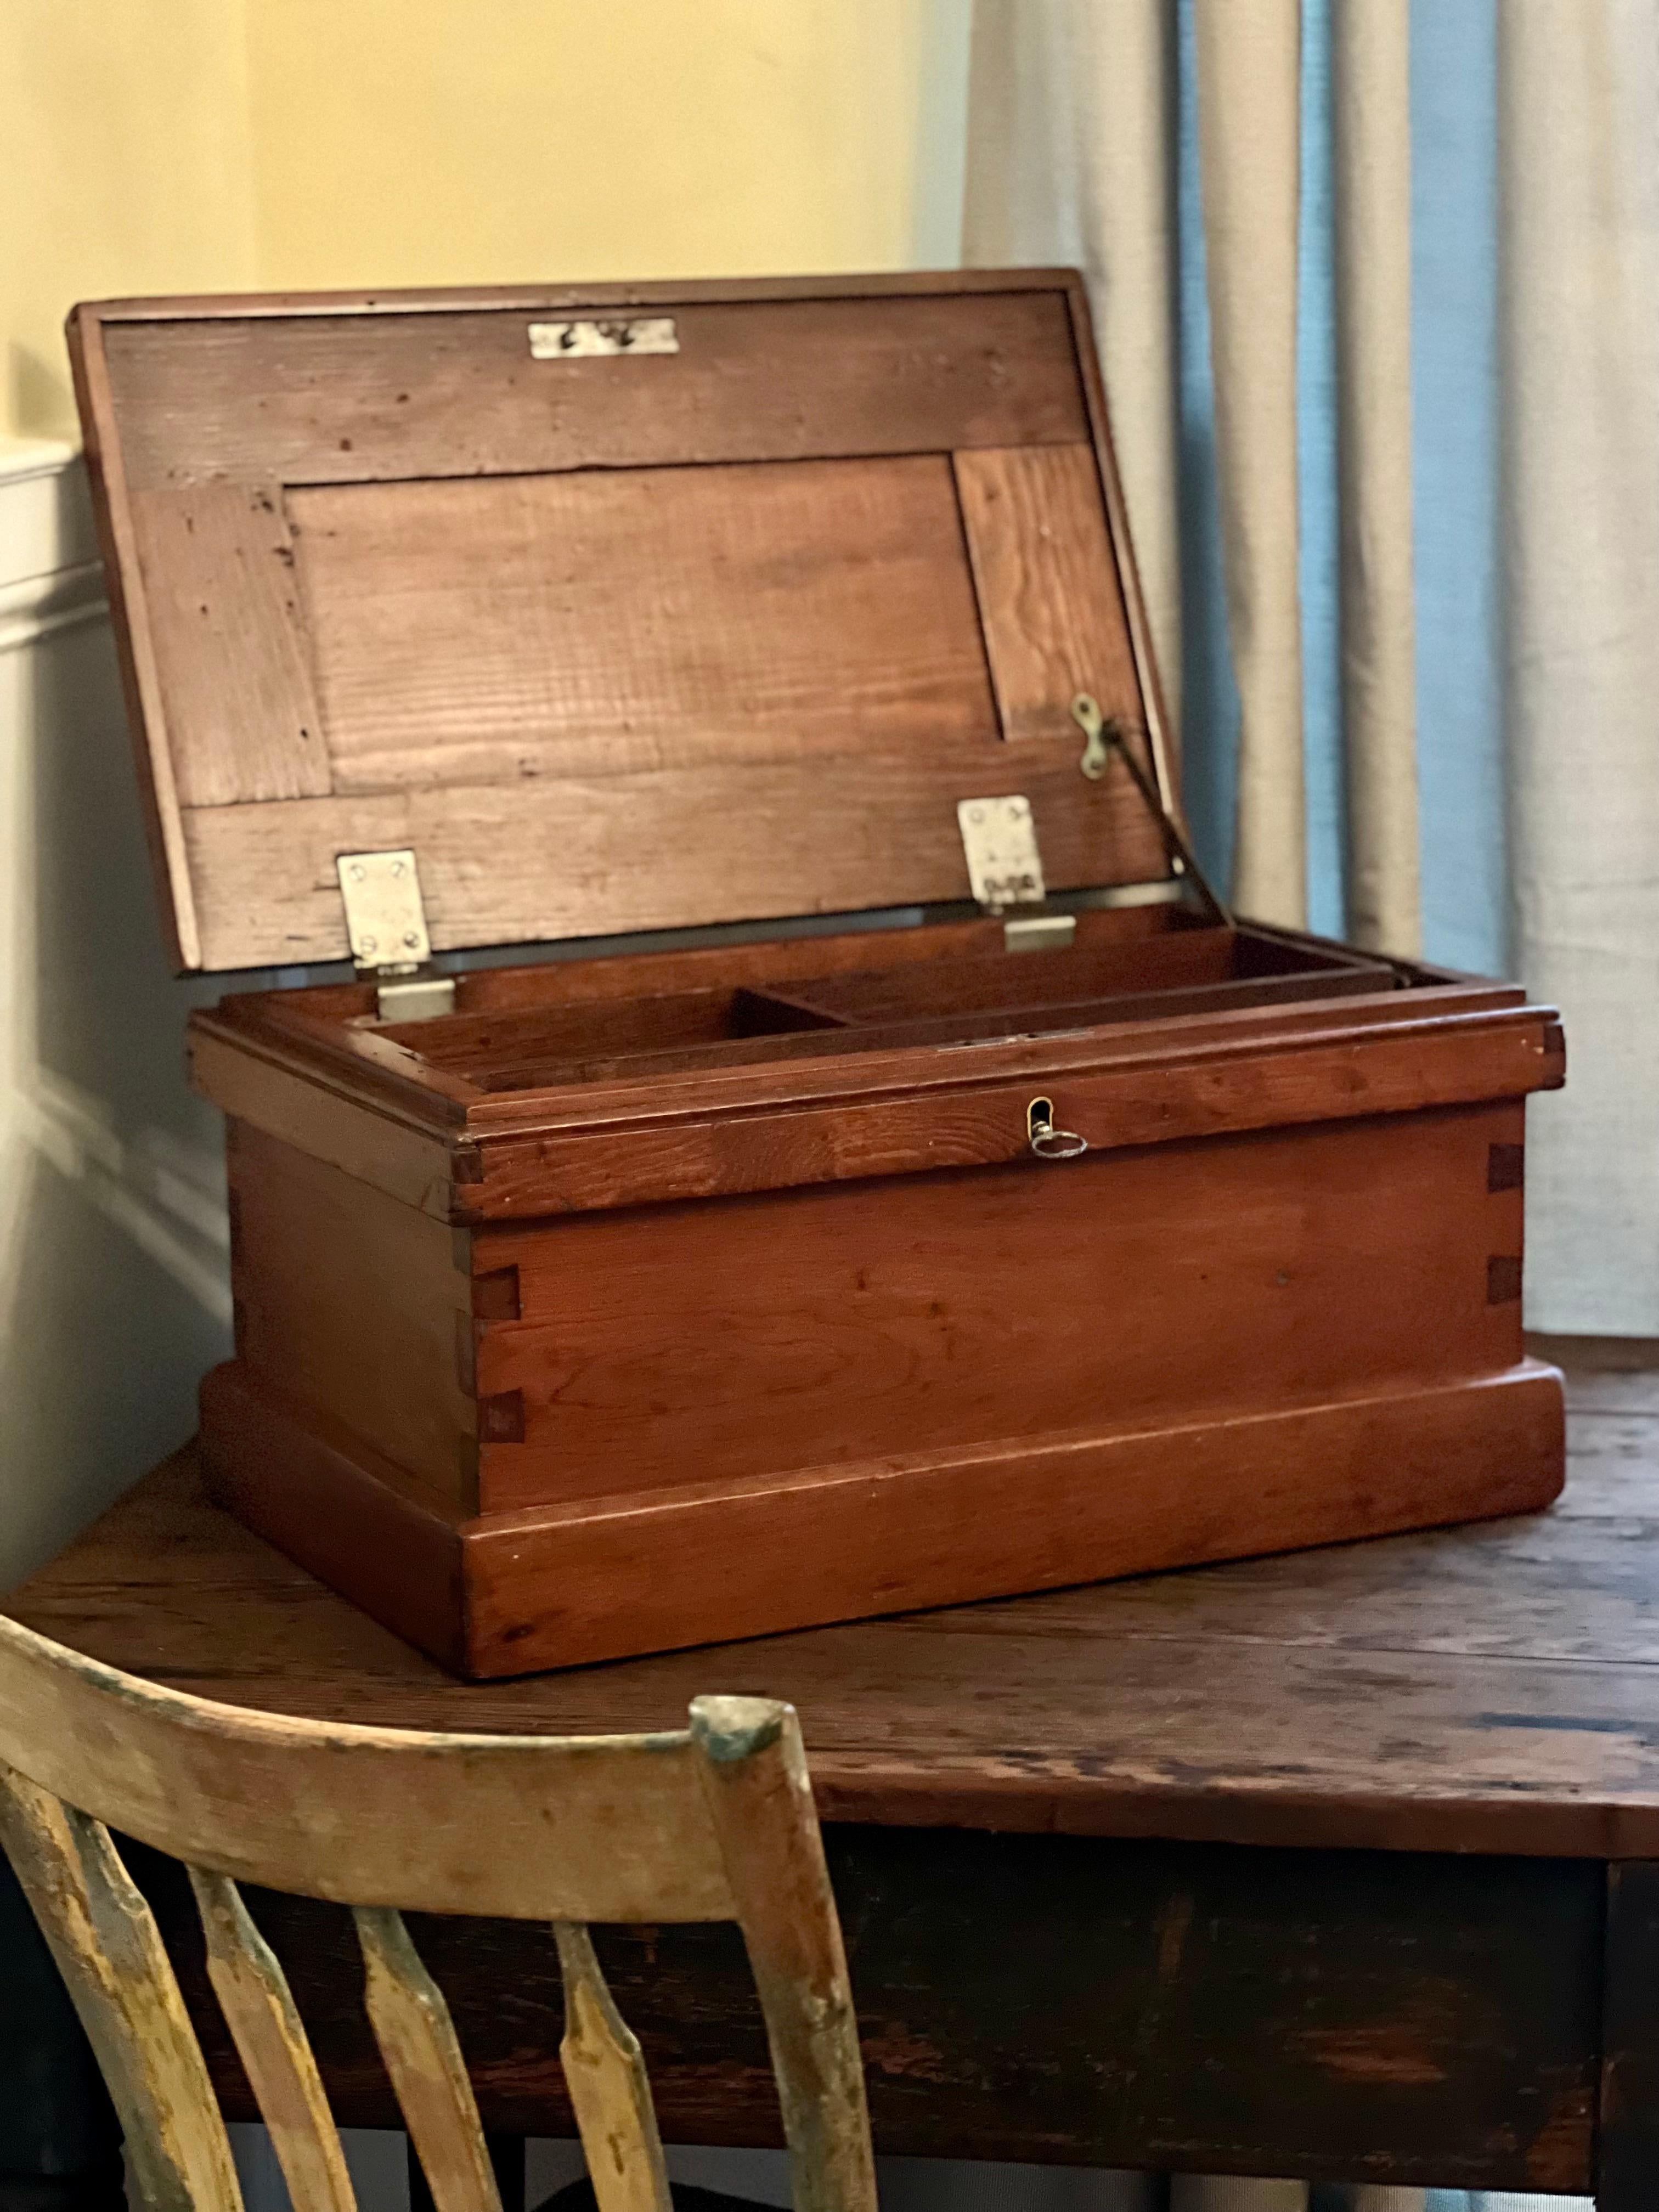 Antique small merchant's chest or box, c. 1920's.

Wonderful petite chest handcrafted of teak and beautifully carved with dovetail joint construction. The divided, sliding tray is removable and offers convenient organization options. The original